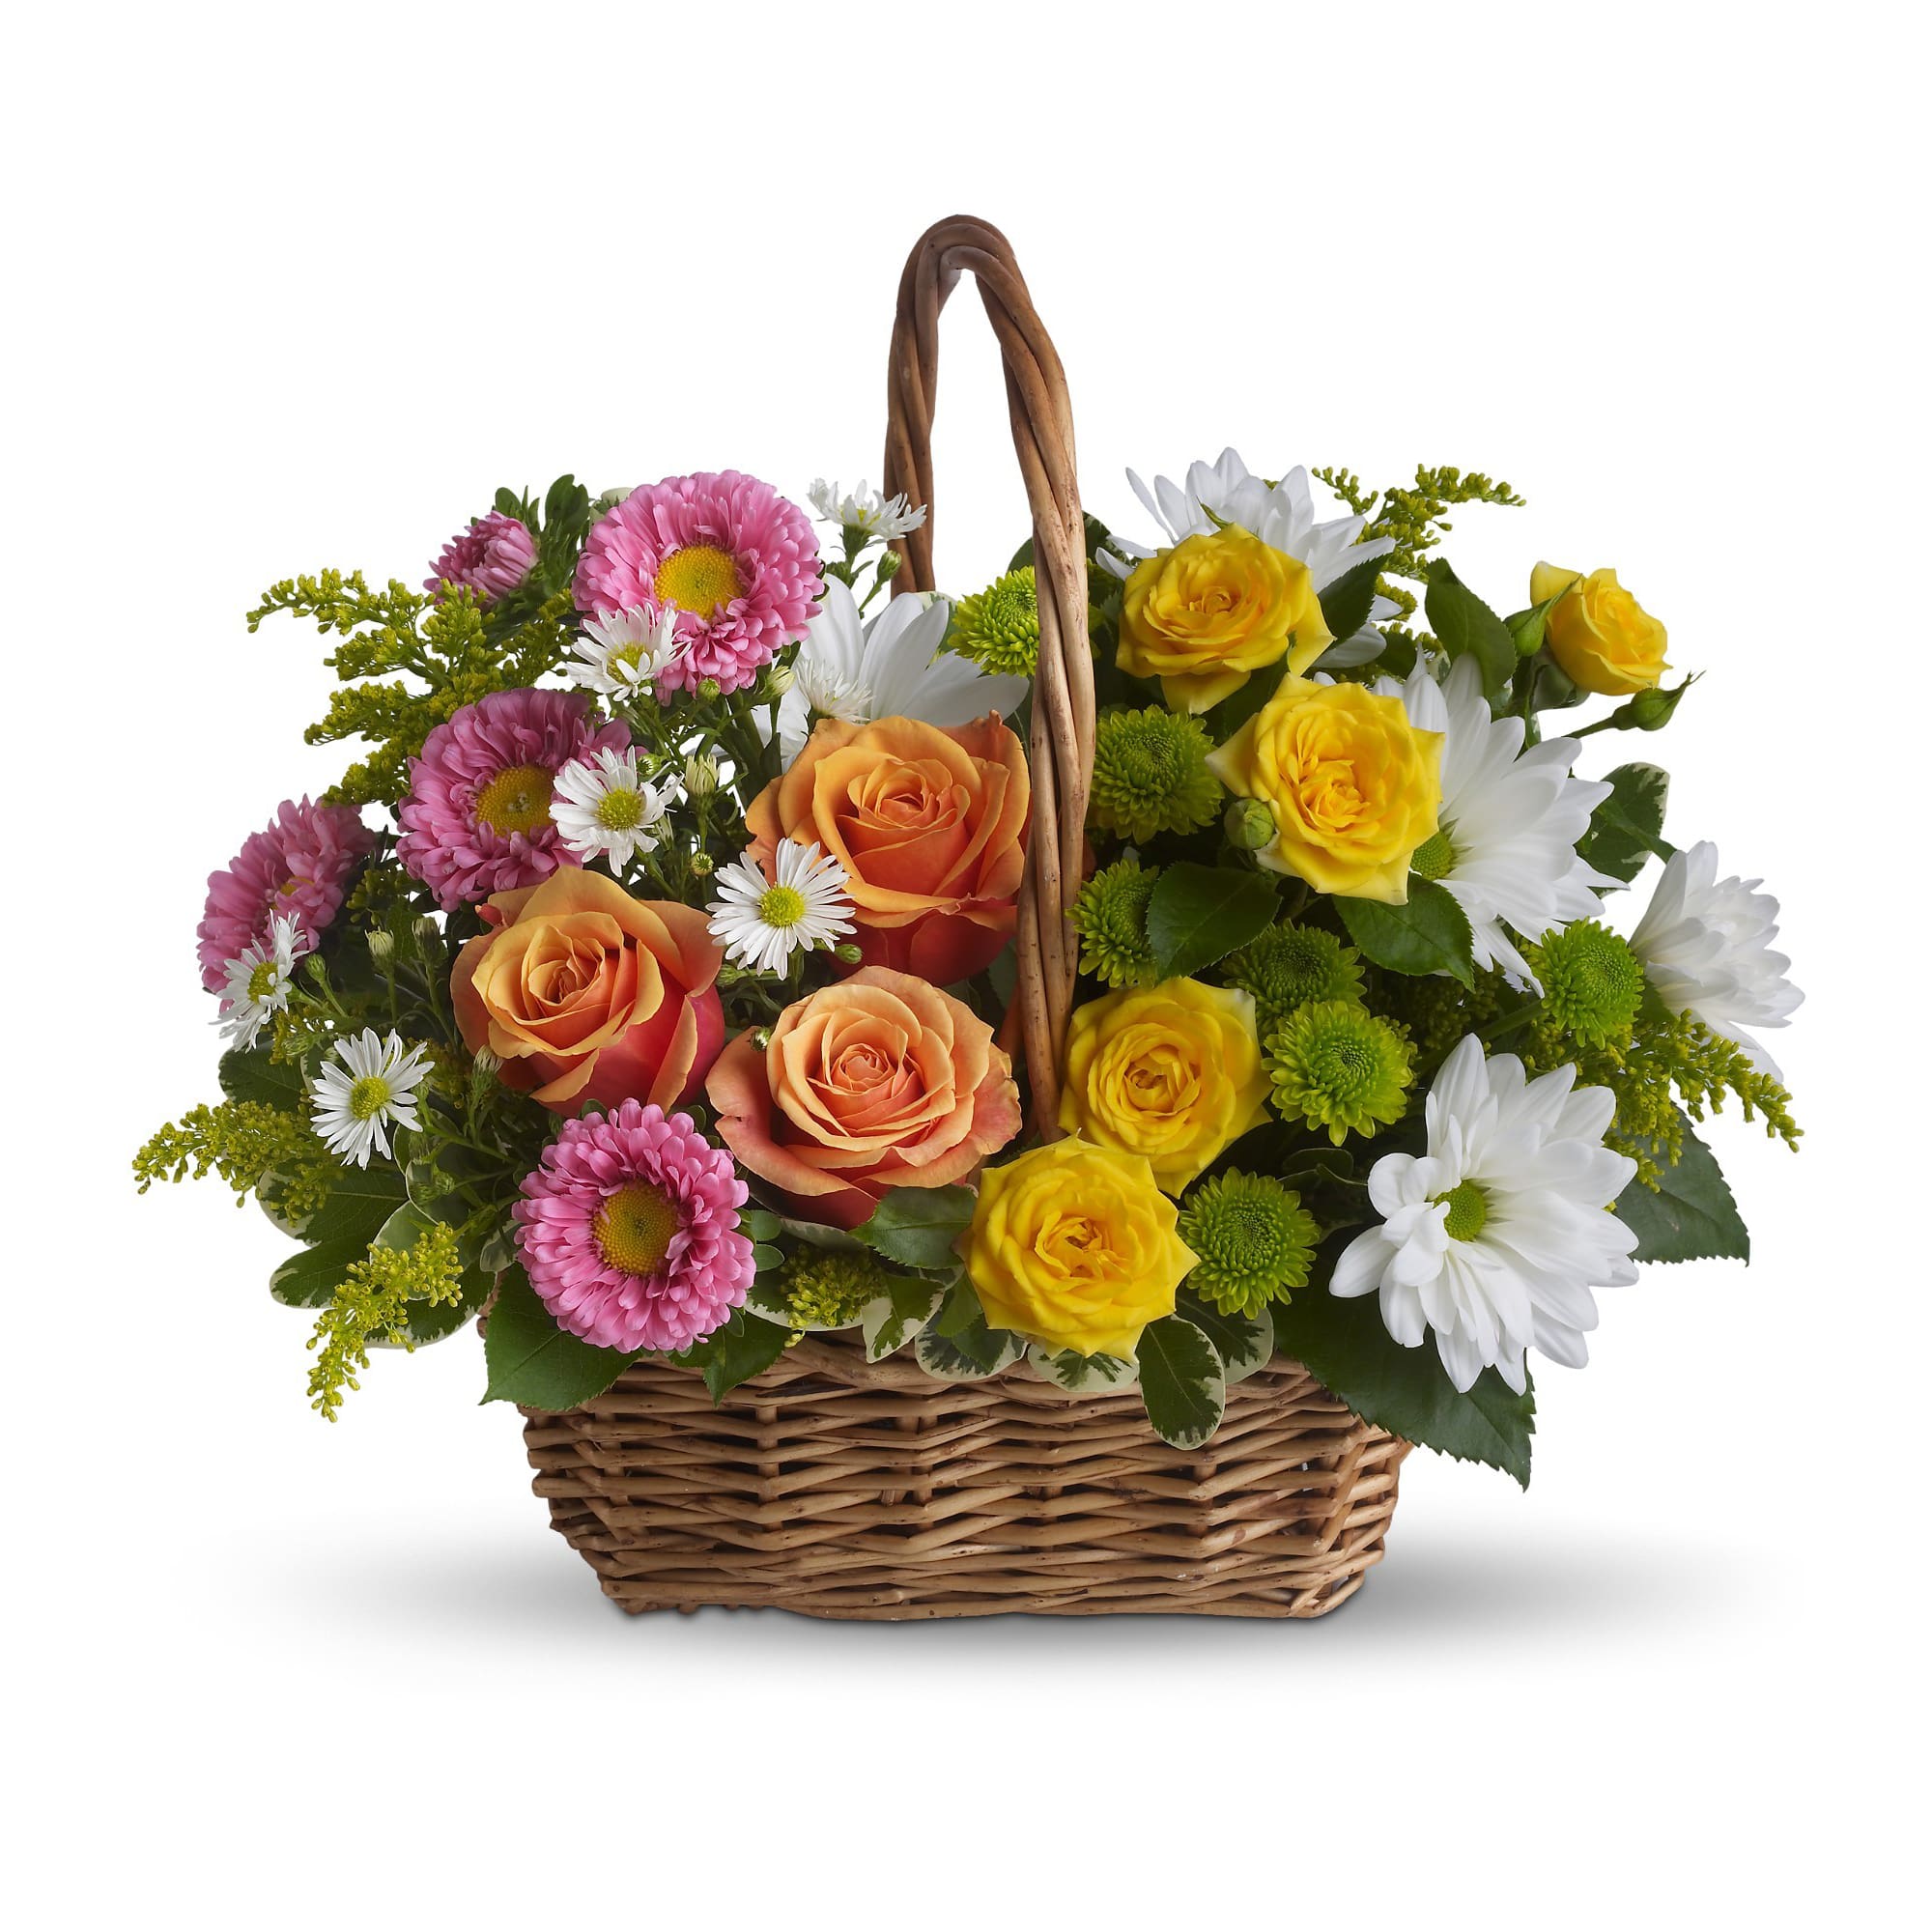 Sweet Tranquility Basket - A basket full of bright blossoms will deliver the warmth of sunshine even when the skies seem gray. Say I love you with this beautiful gift  